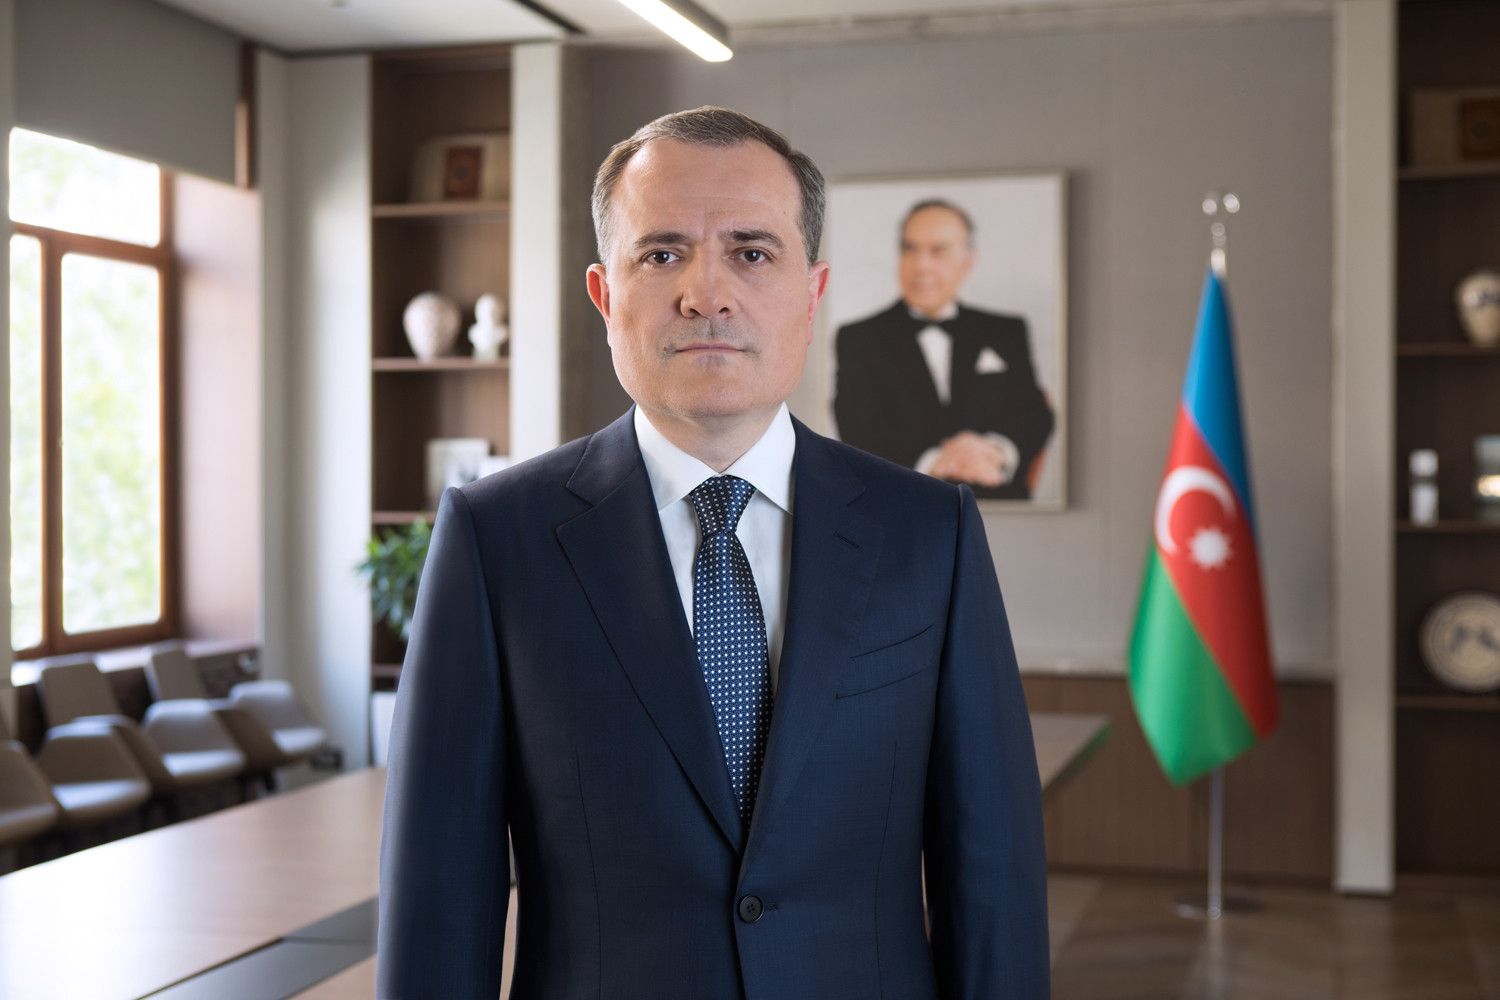 Azerbaijani foreign minister visiting Israel for embassy inauguration